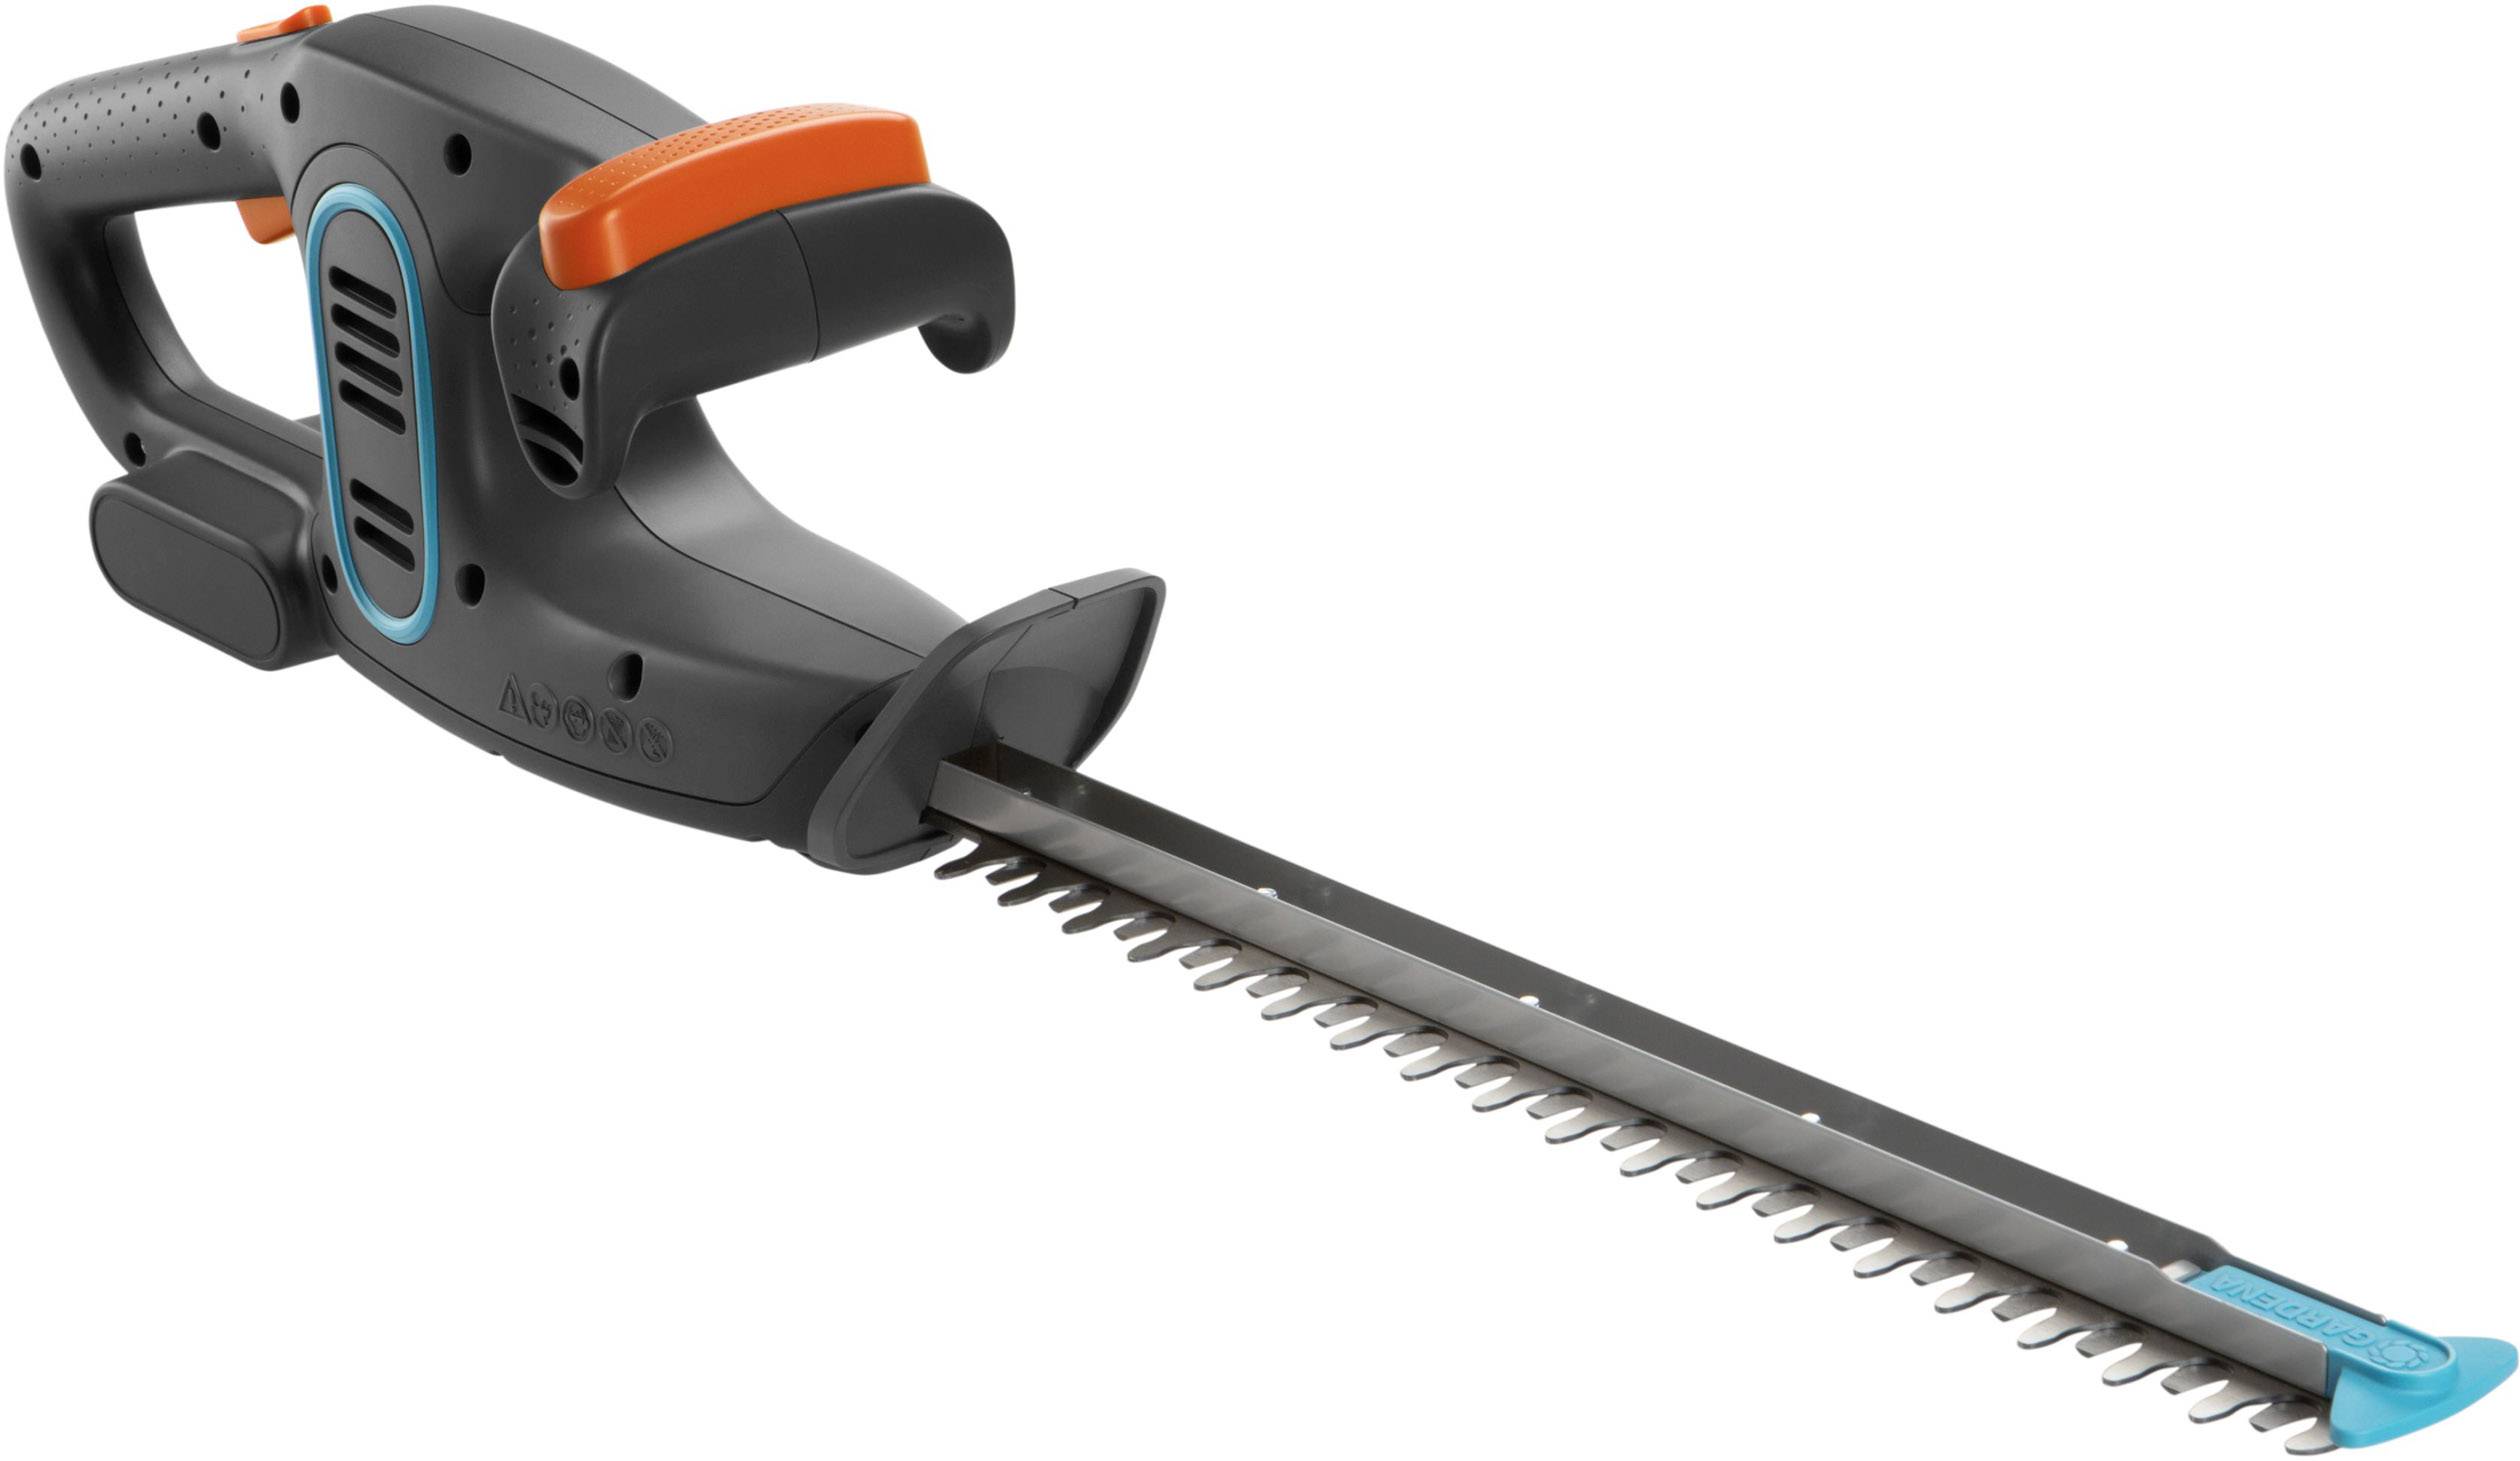 small battery operated hedge trimmer